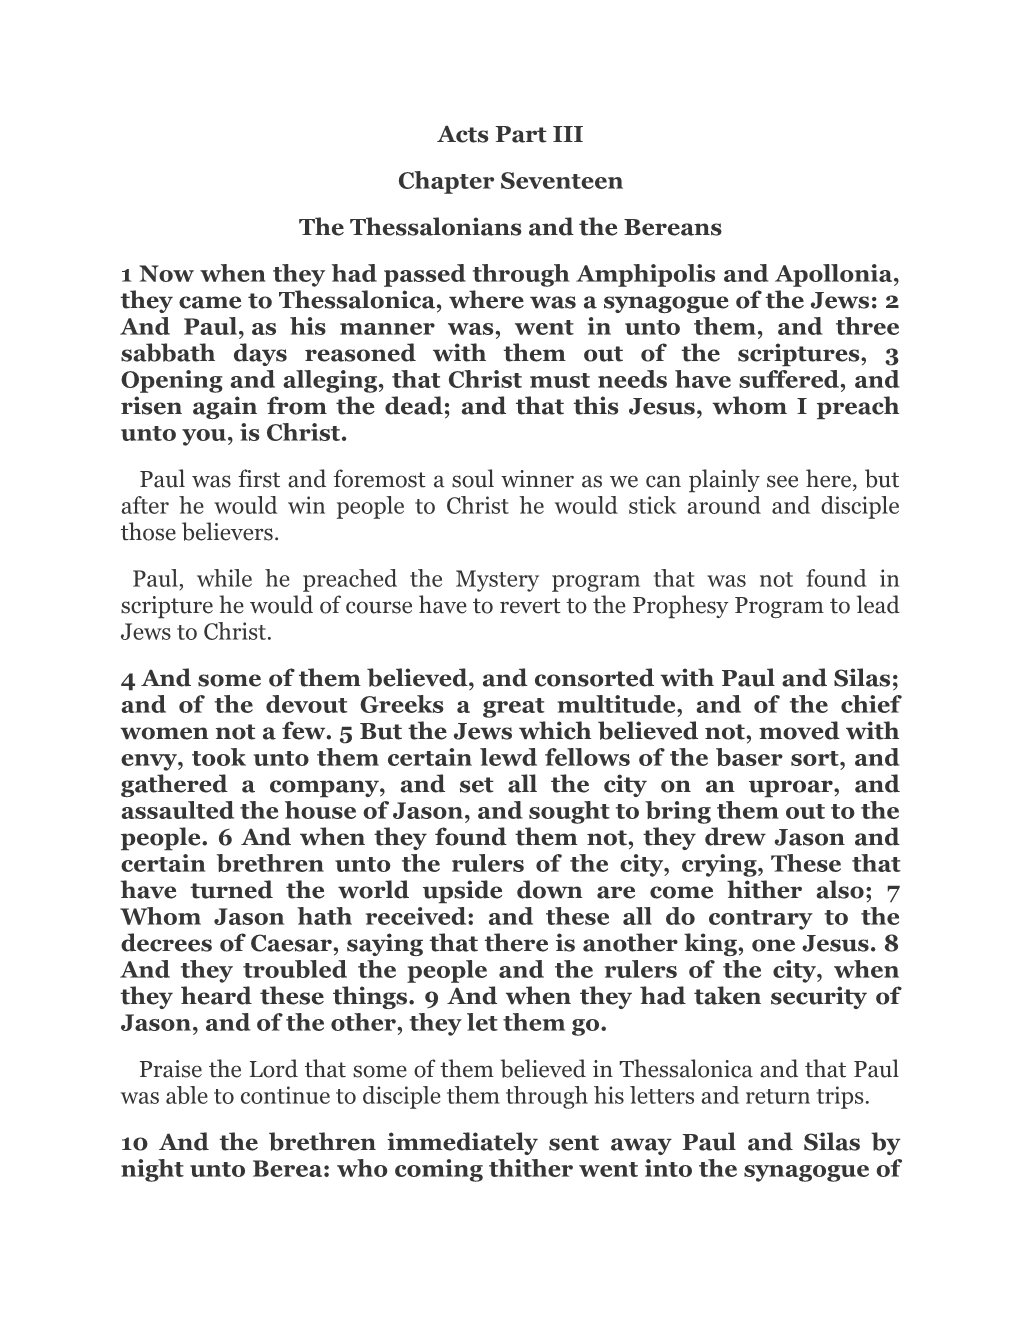 The Thessalonians and the Bereans